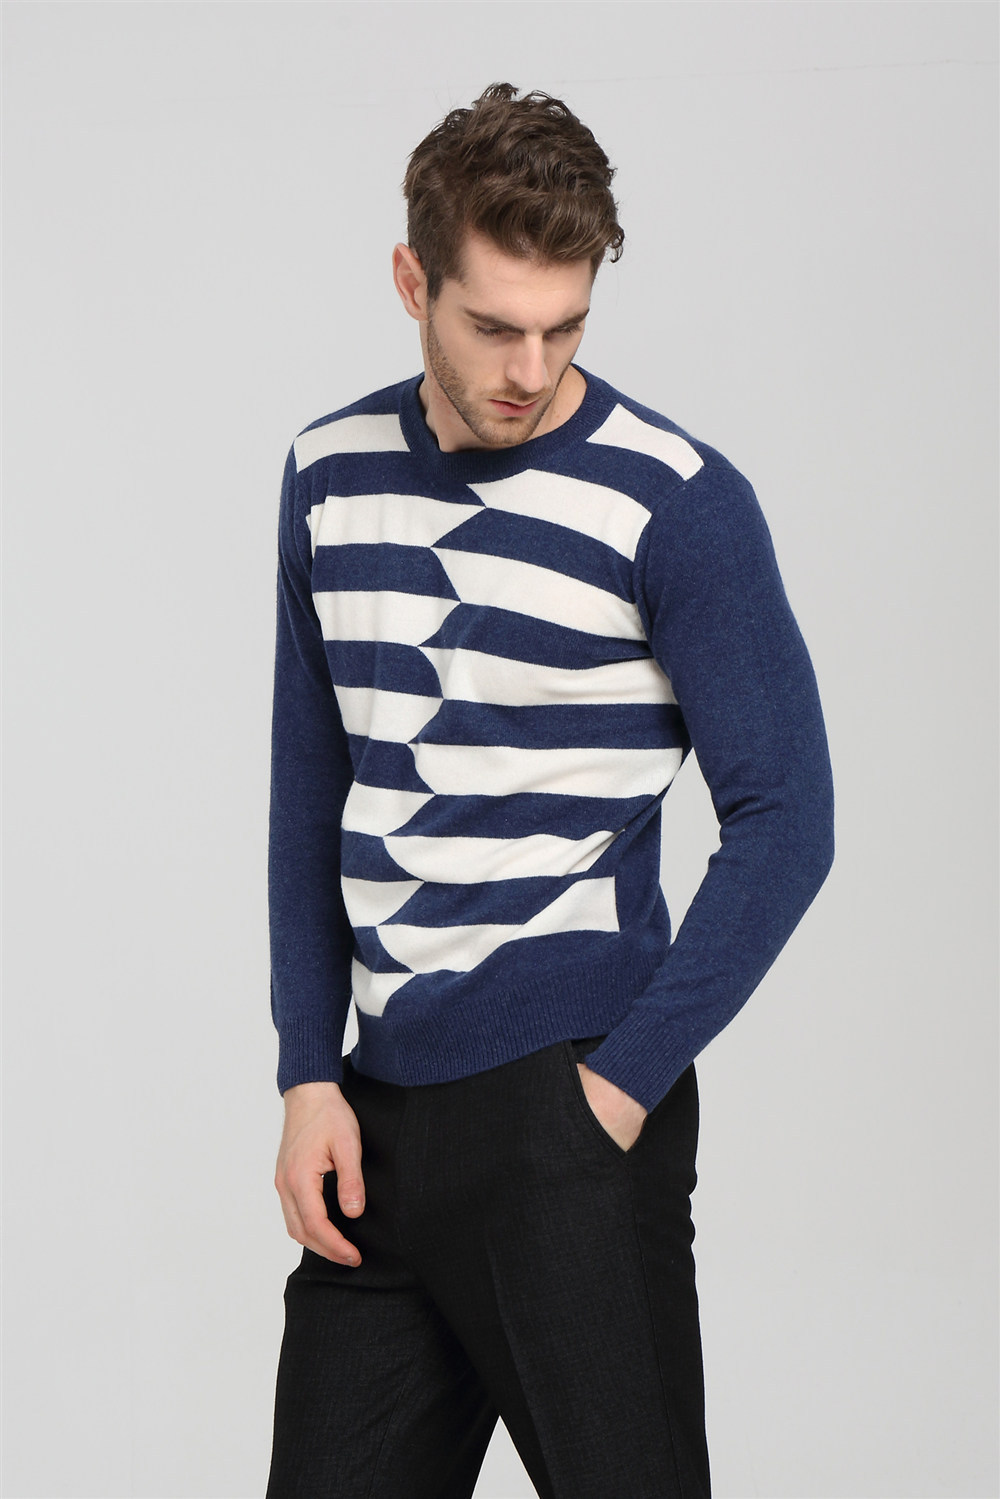 mens cashmere sweater with stripes